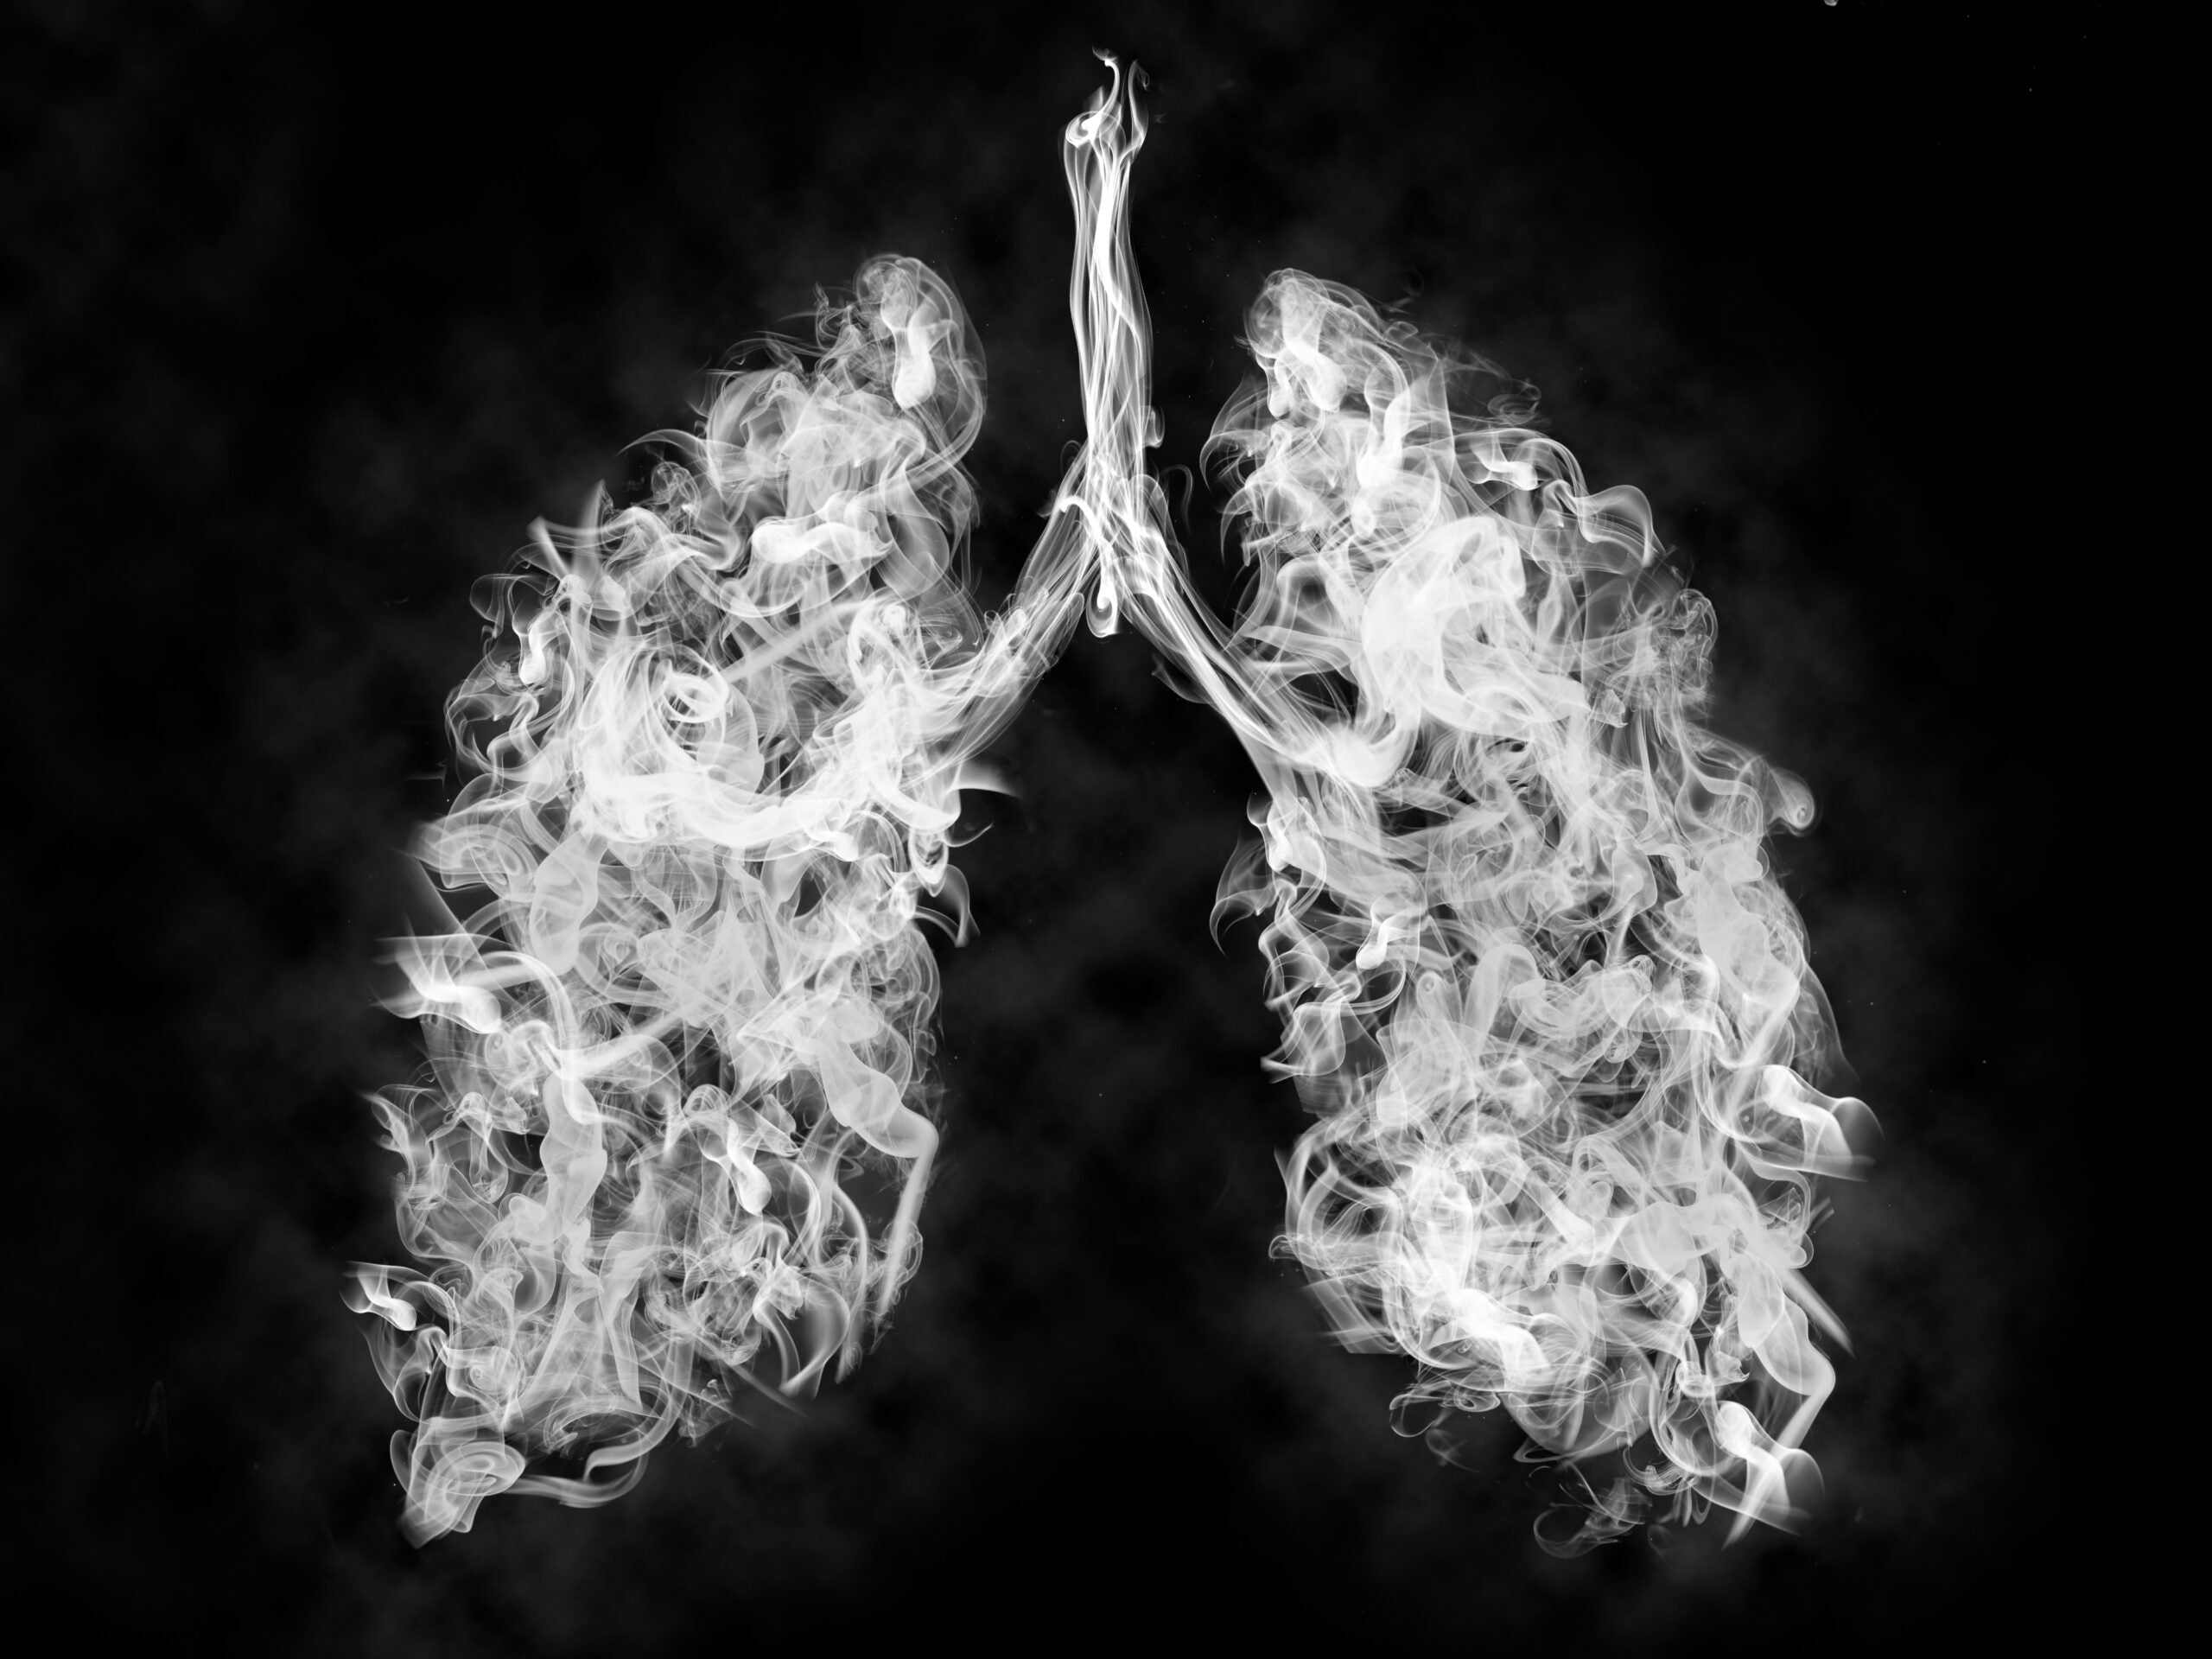 Smoking Cannabis Alters Lungs Differently Than Smoking Tobacco